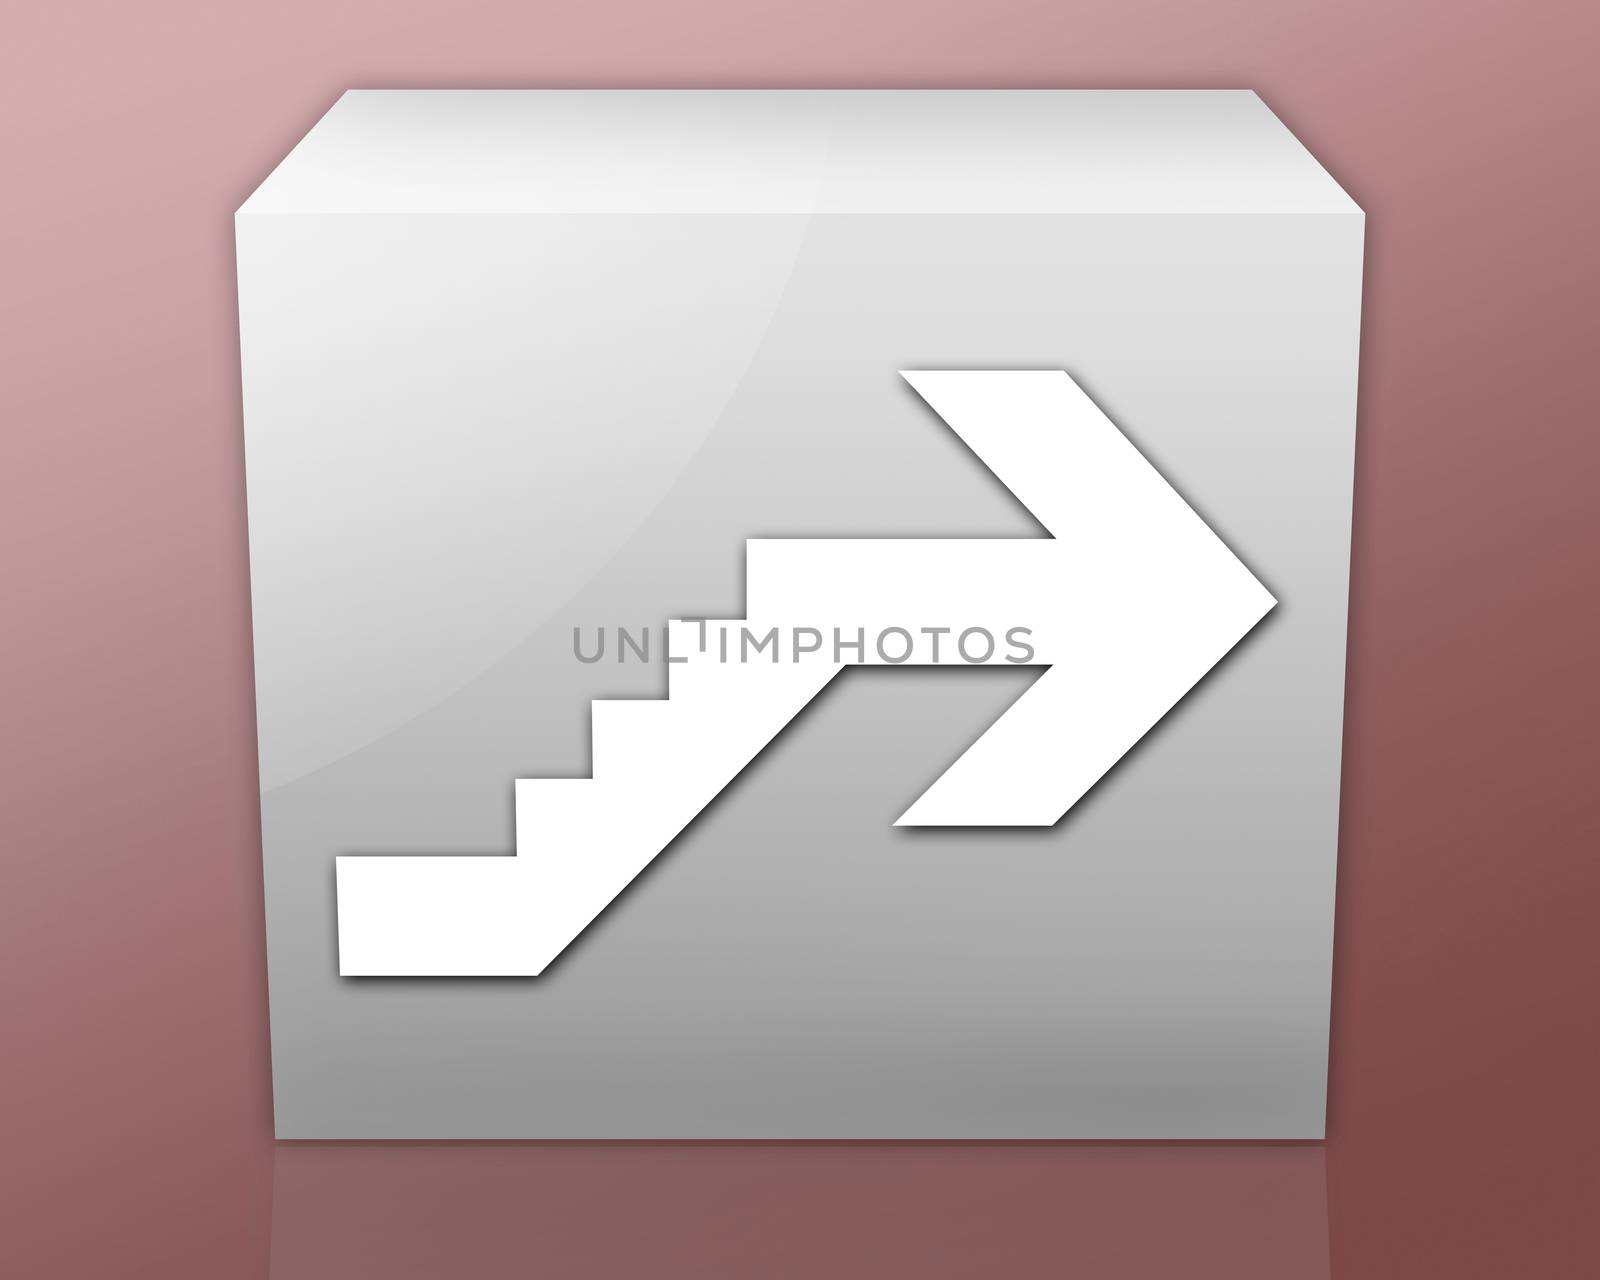 Icon, Button, Pictogram Upstairs by mindscanner